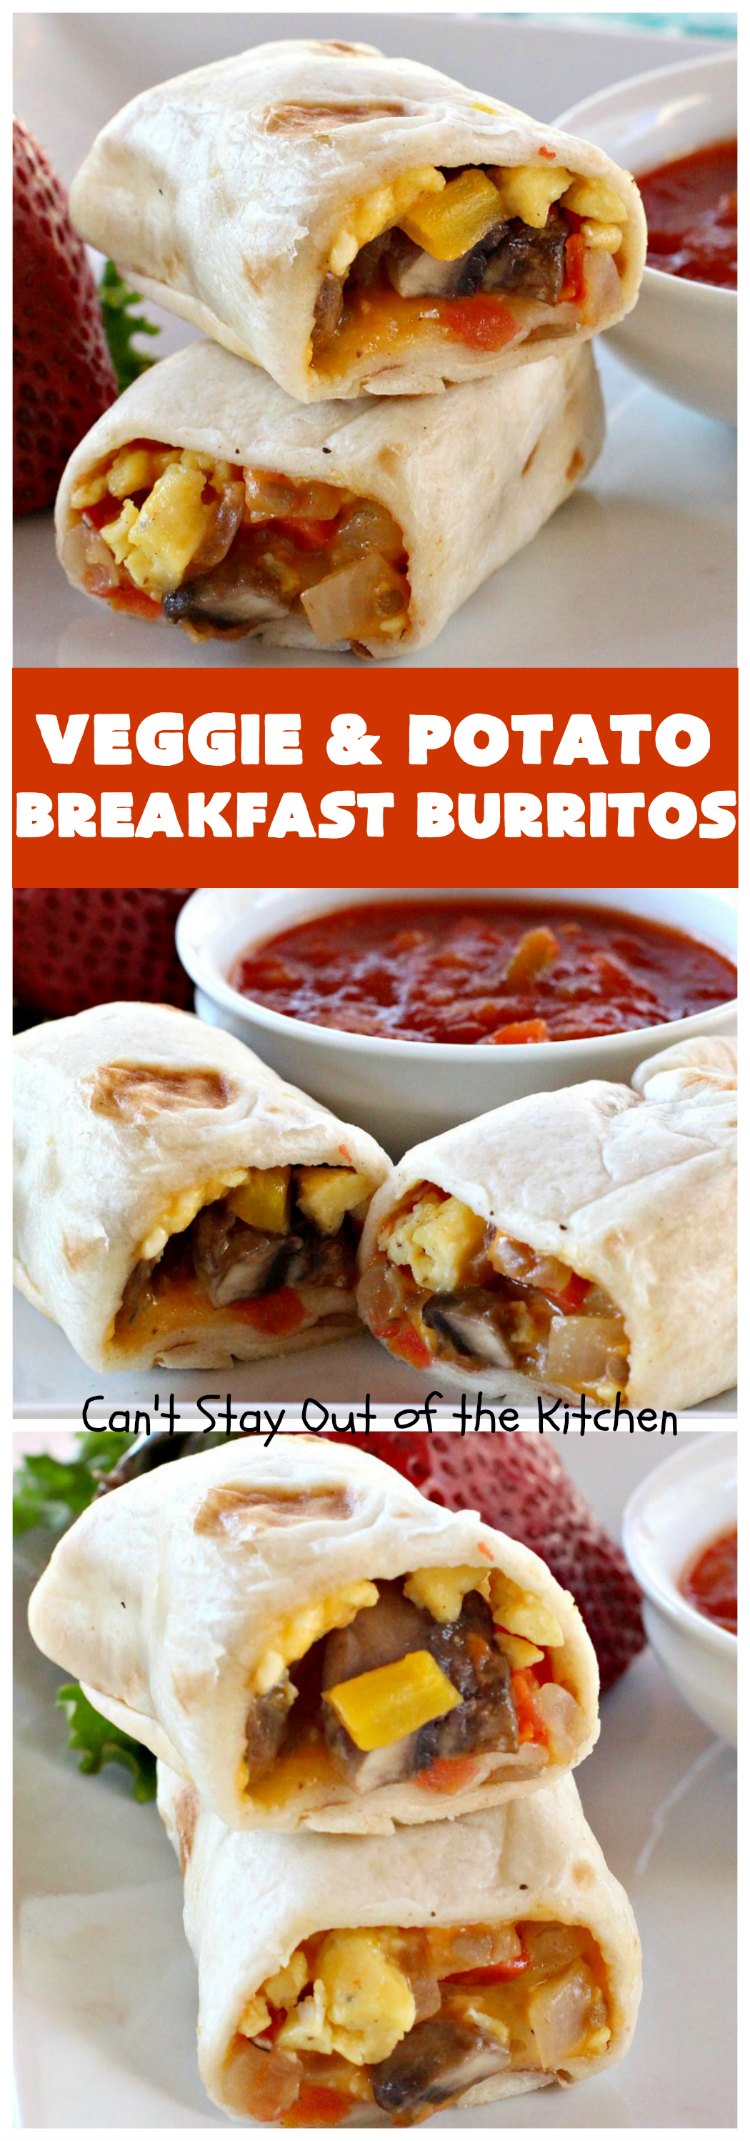 Veggie and Potato Breakfast Burritos | Can't Stay Out of the Kitchen